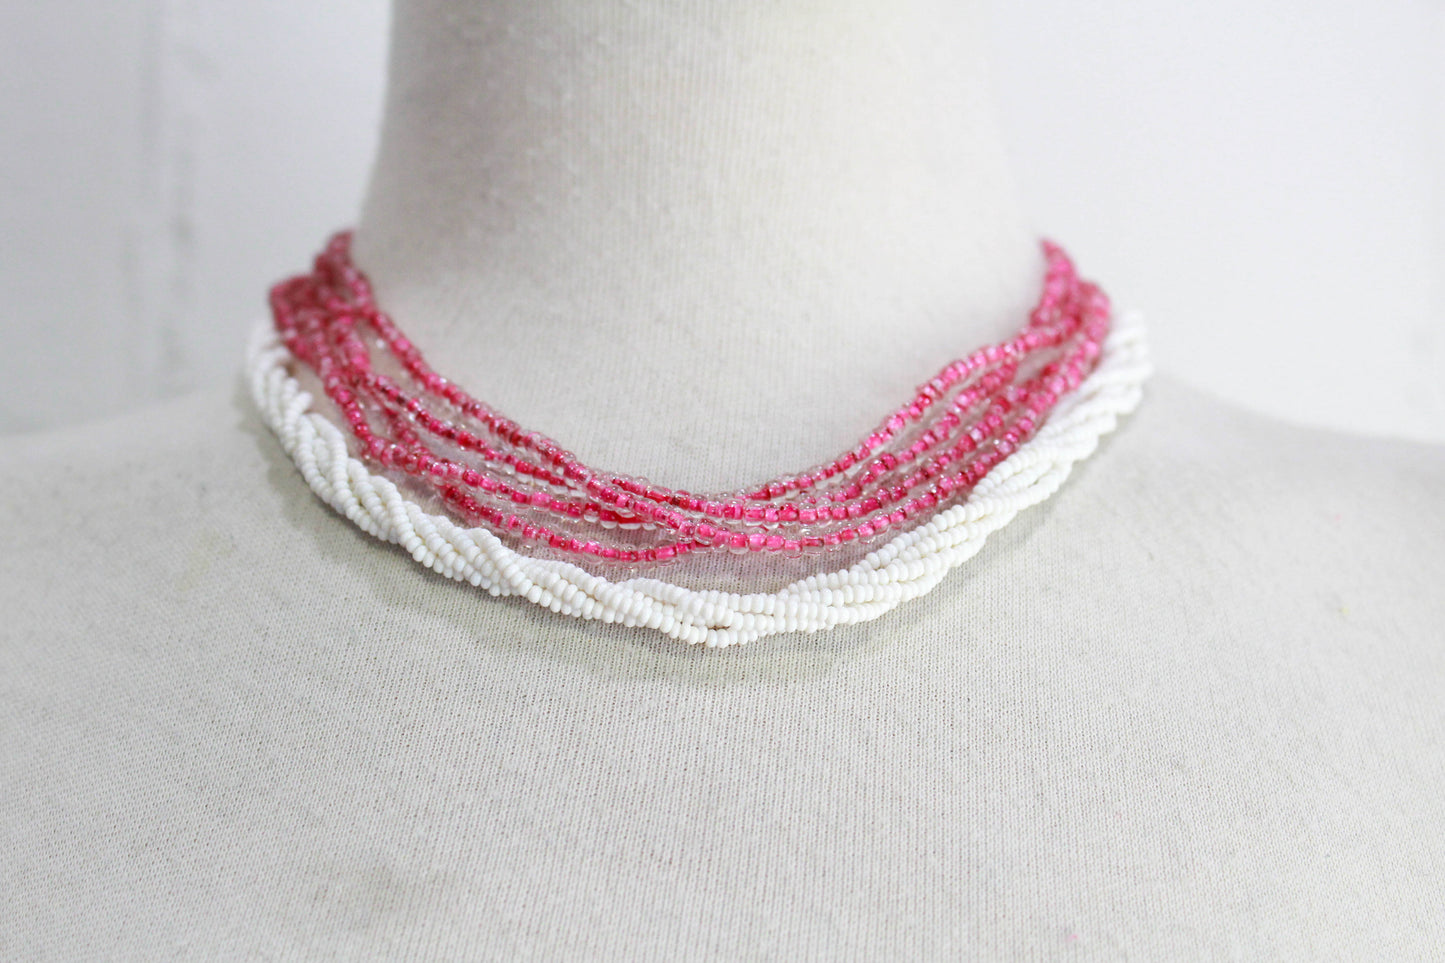 1940s/50s Glass Torsade, Pink and White Beads Necklace